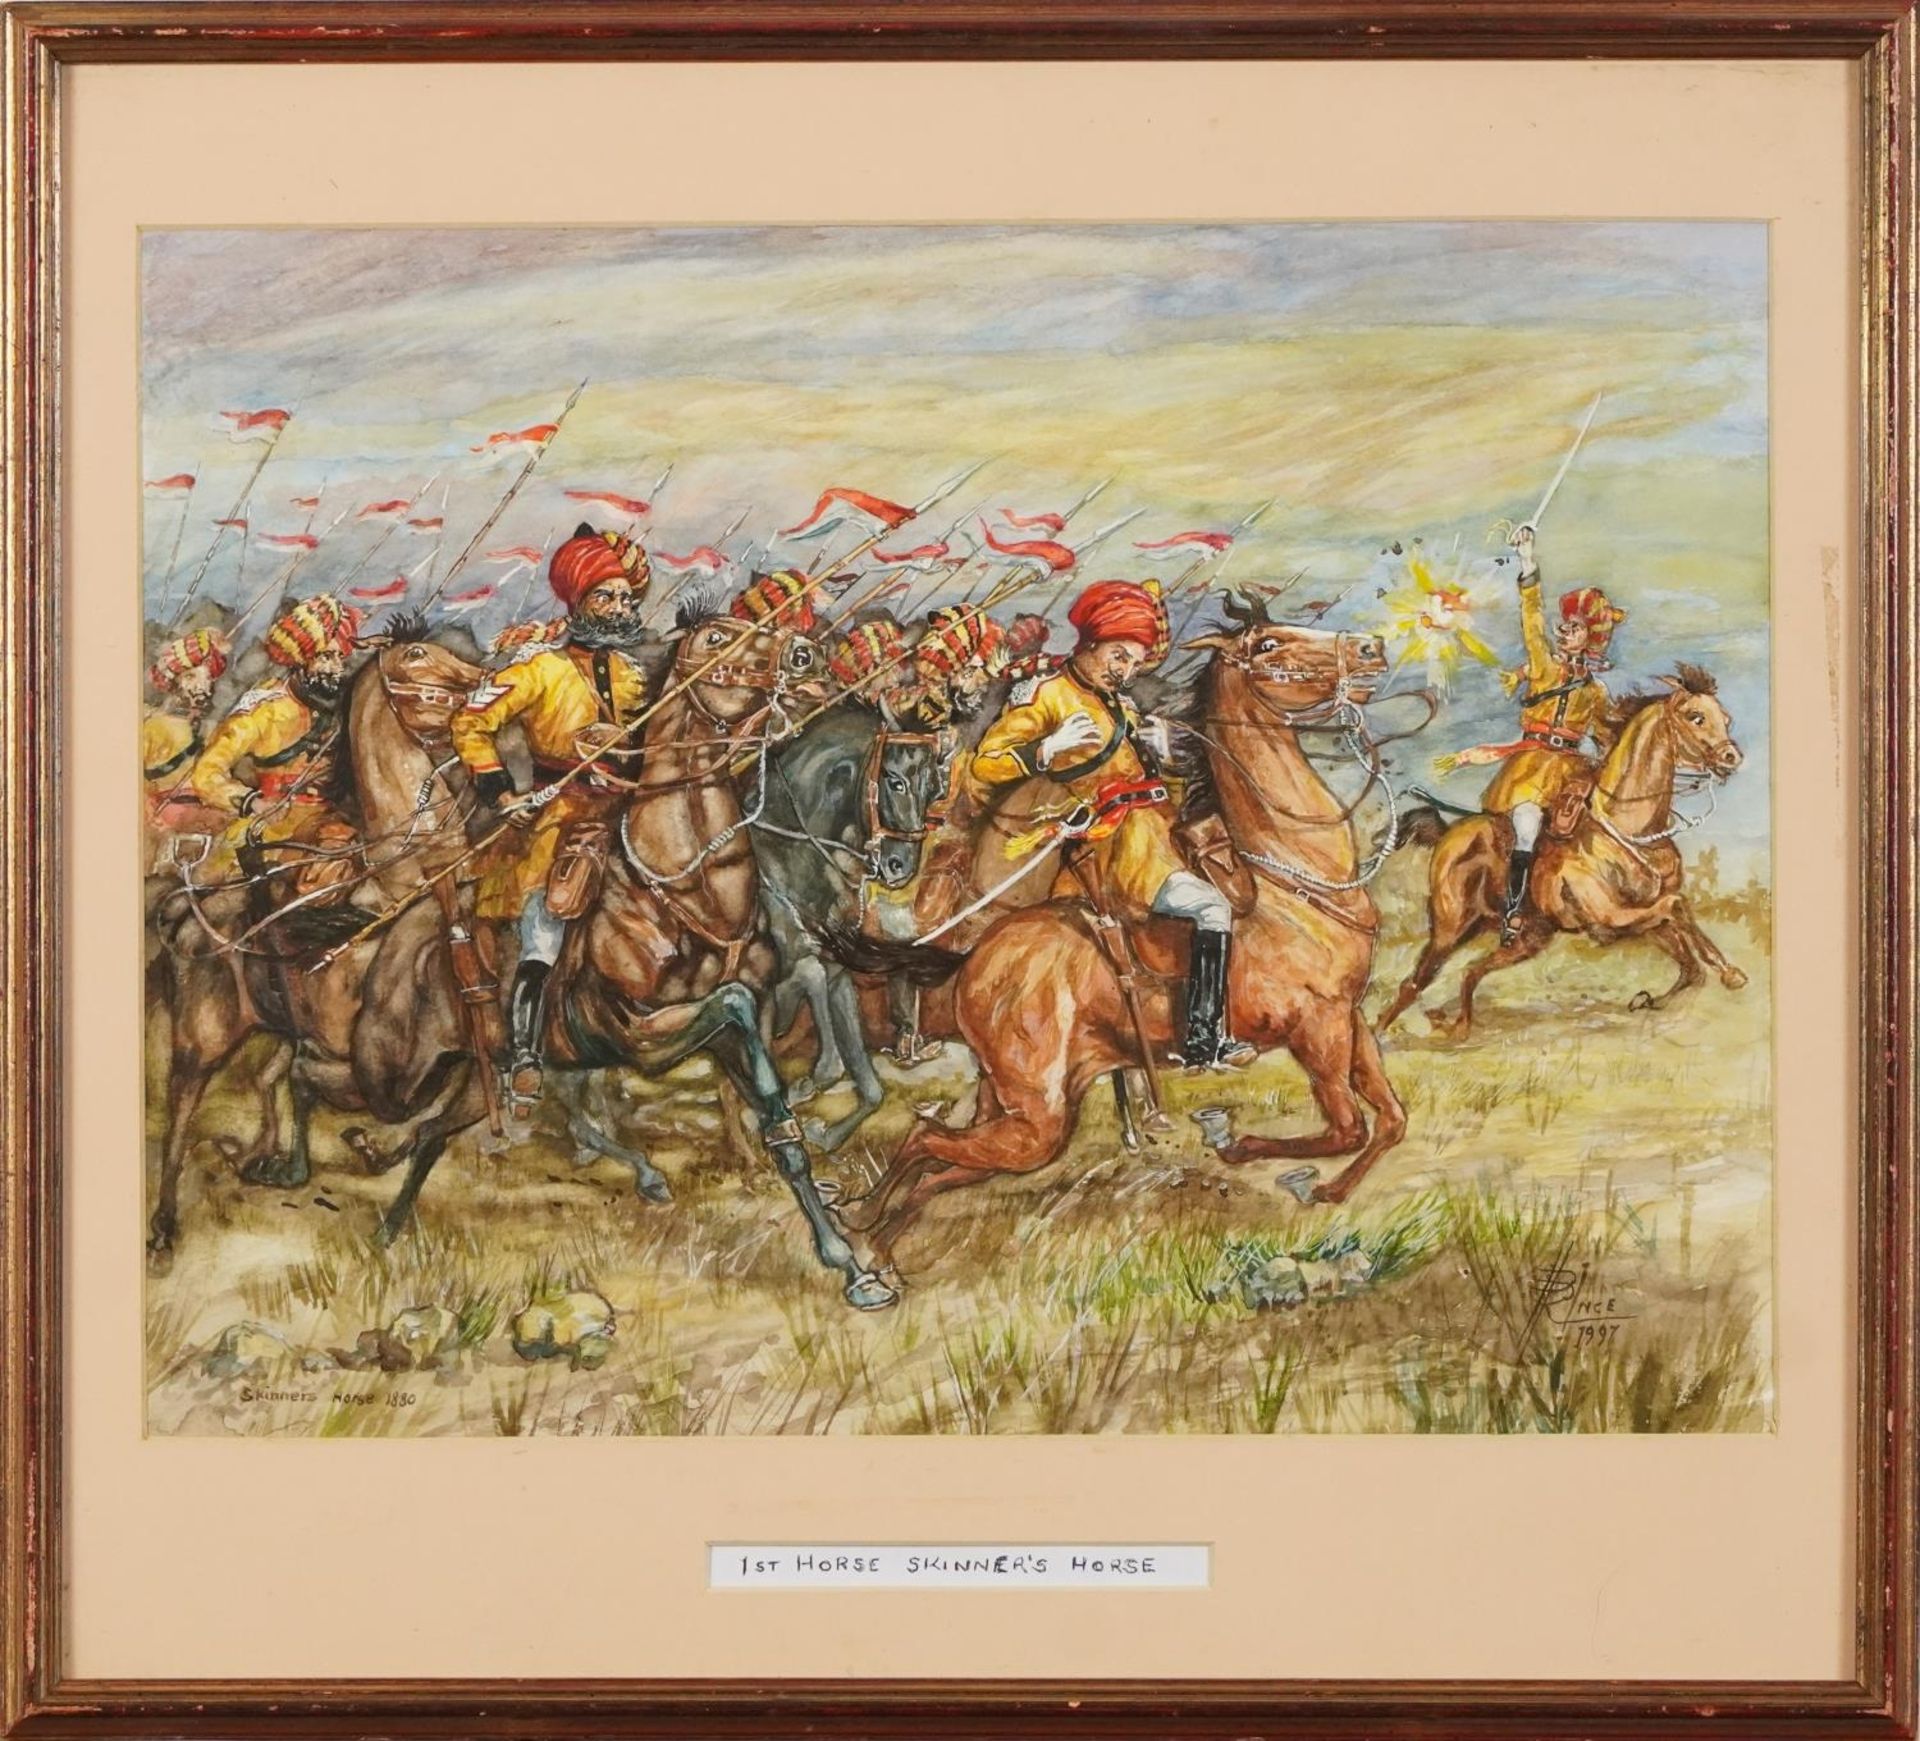 R Ince - Charge of the Bengal Lancers entitled First Horse Skinner's Horse, military interest - Image 2 of 5